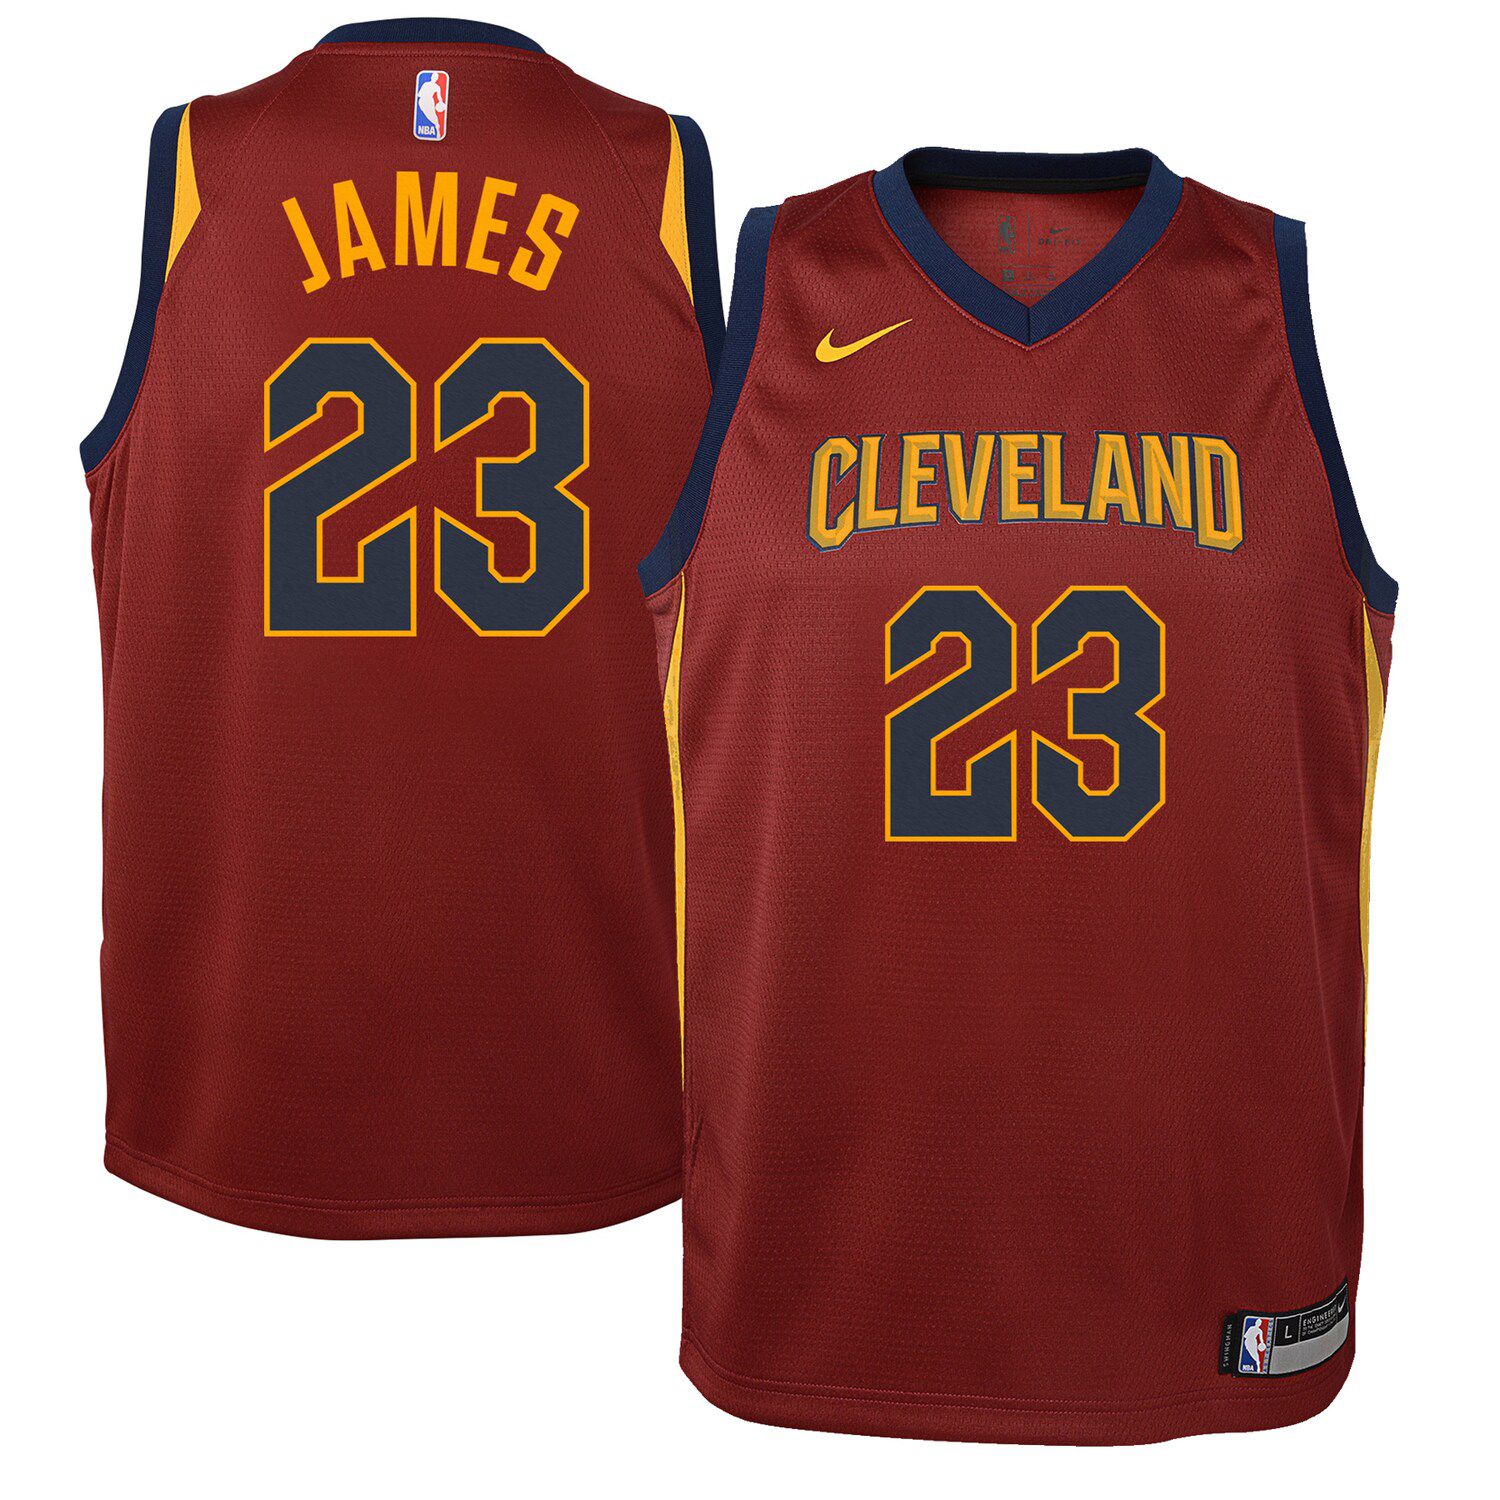 lebron james jersey youth